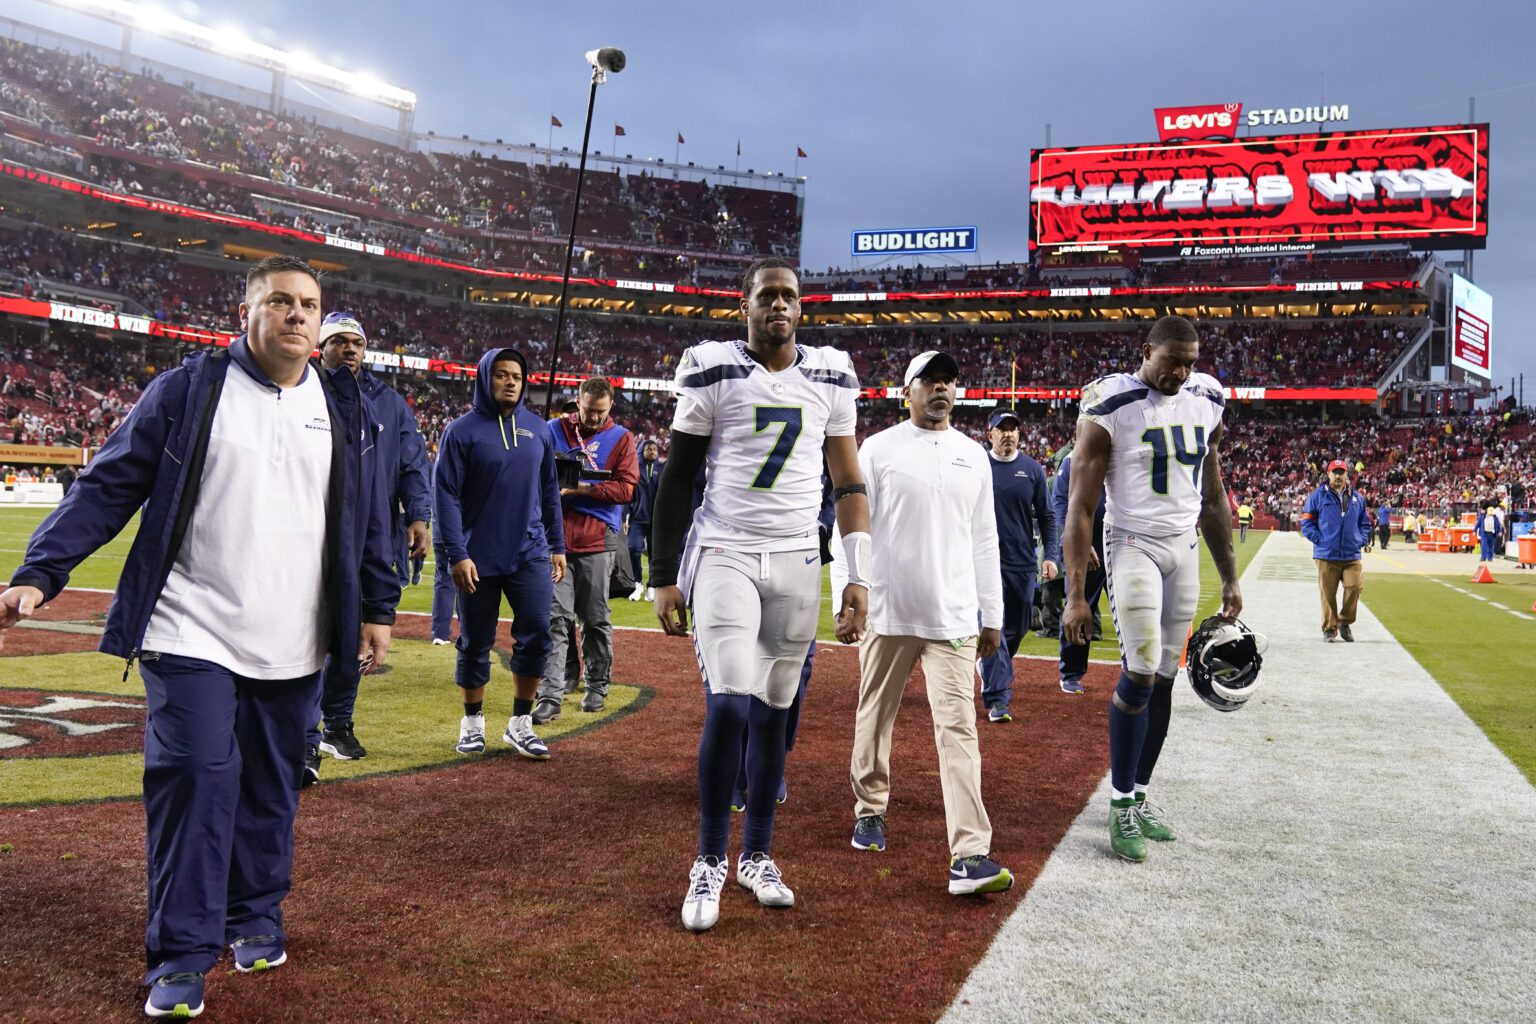 Seattle Seahawks quarterback Geno Smith (7) and wide receiver DK Metcalf (14) walk off the field after an NFL wild card playoff football game against the San Francisco 49ers in Santa Clara